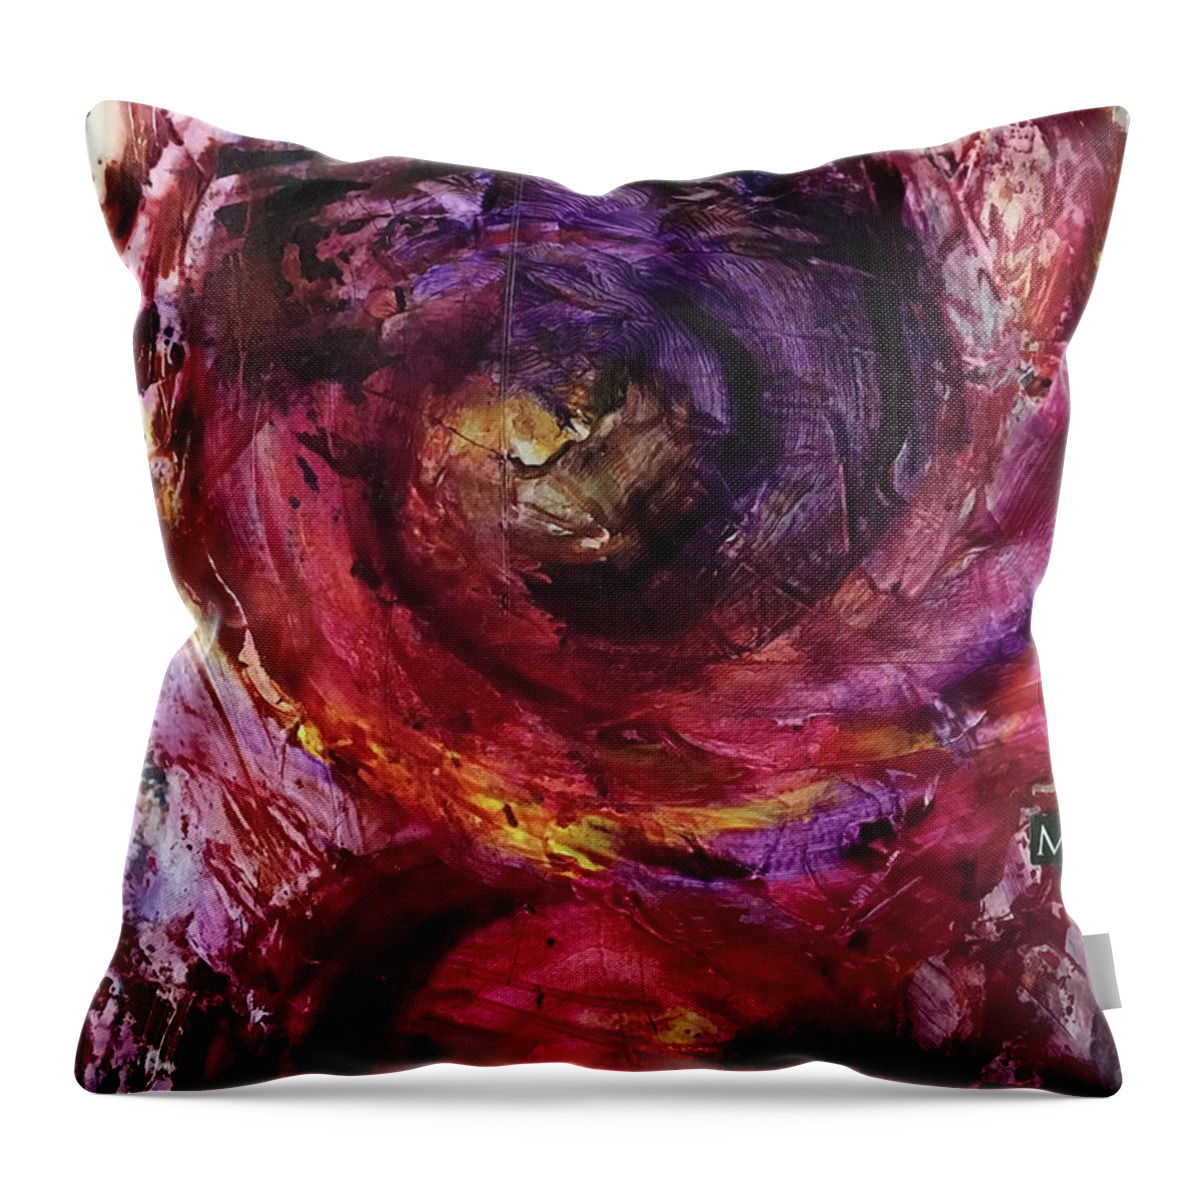 Abstract Art Throw Pillow featuring the painting Ritual Unfolds by Rodney Frederickson